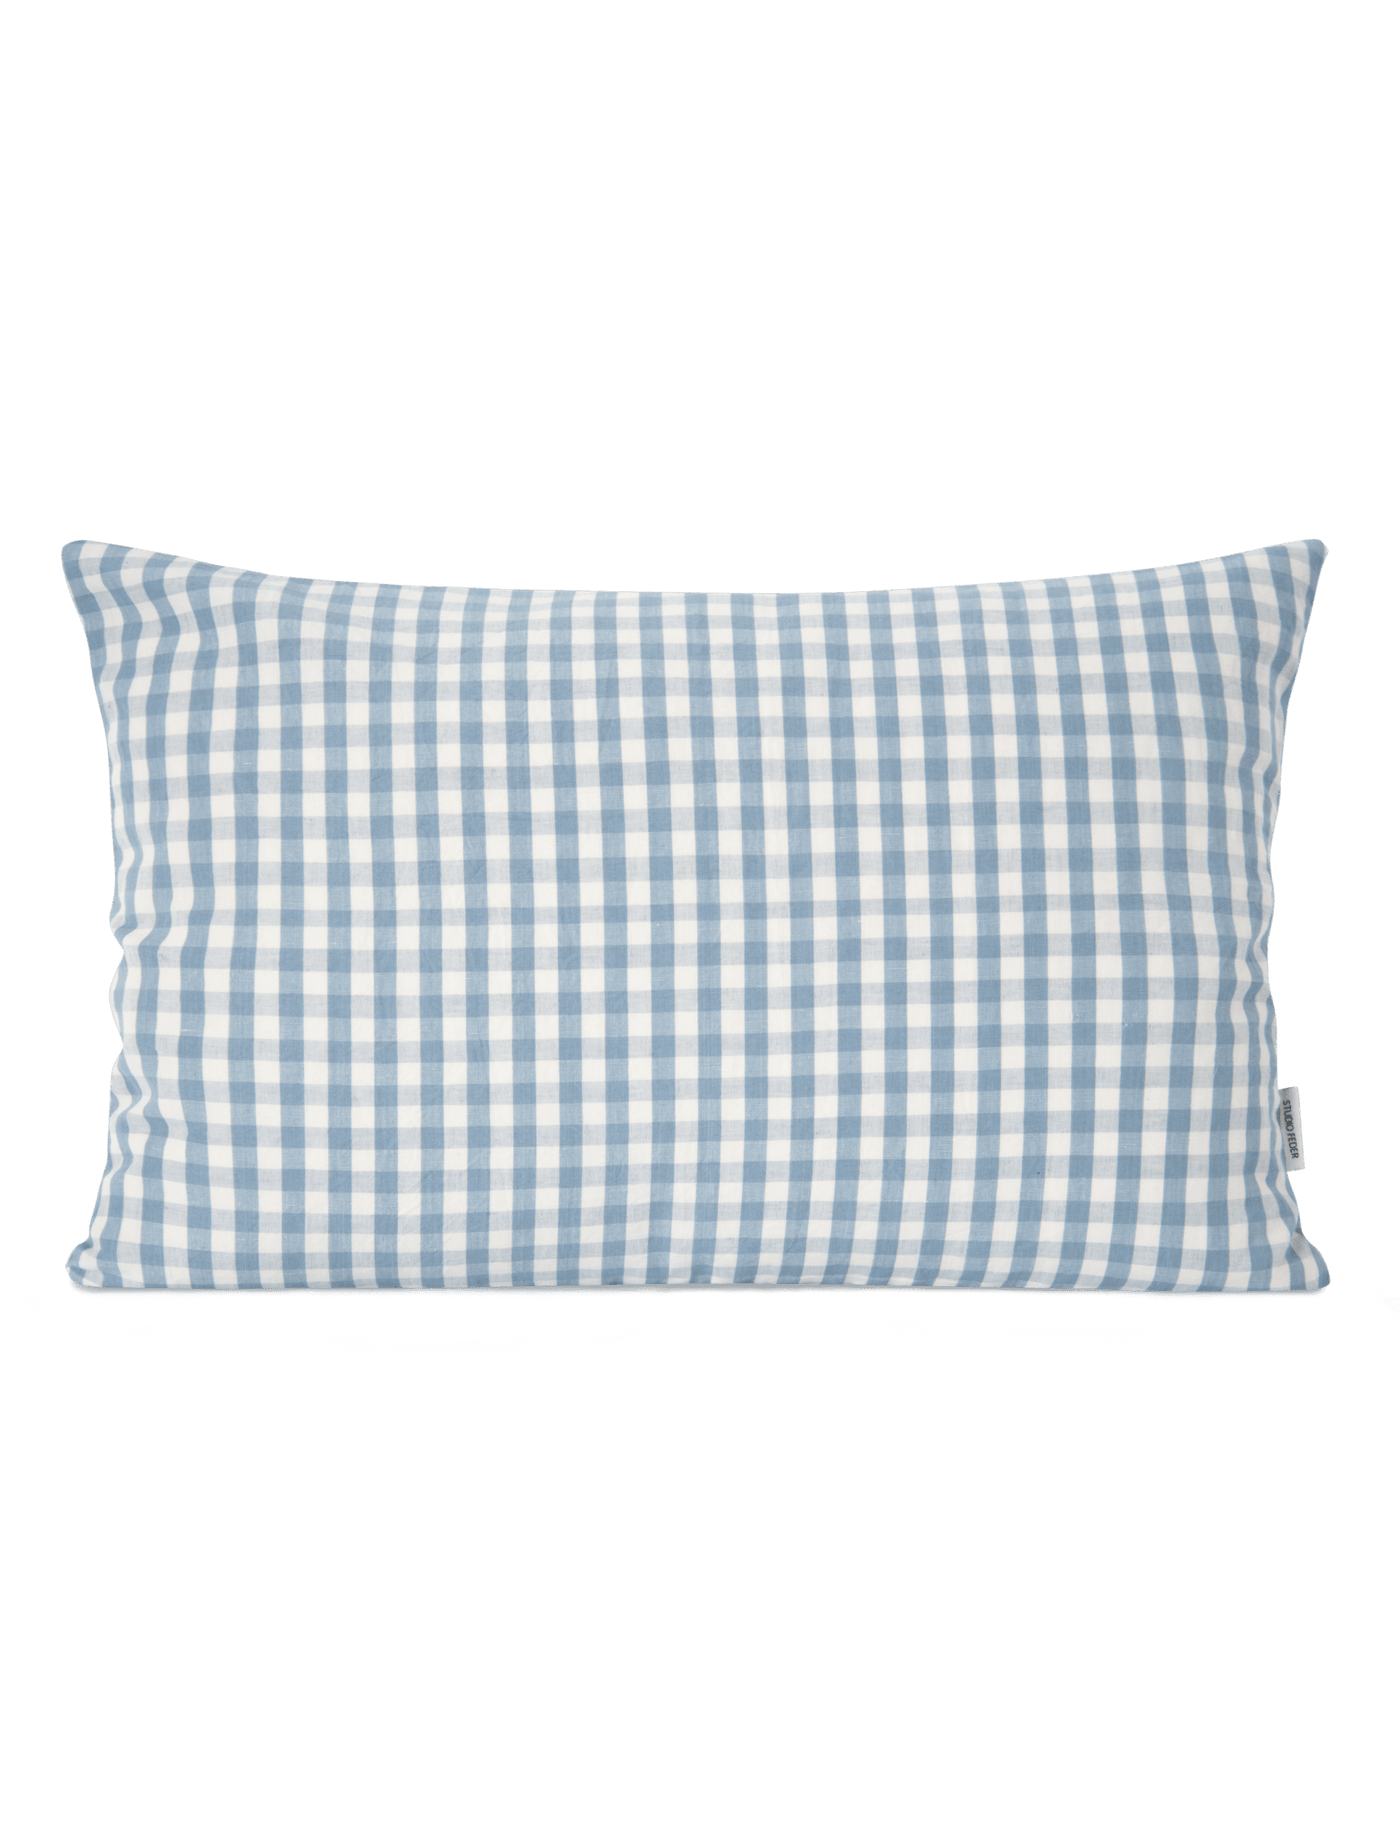 Maddie Pude - Gingham Blue